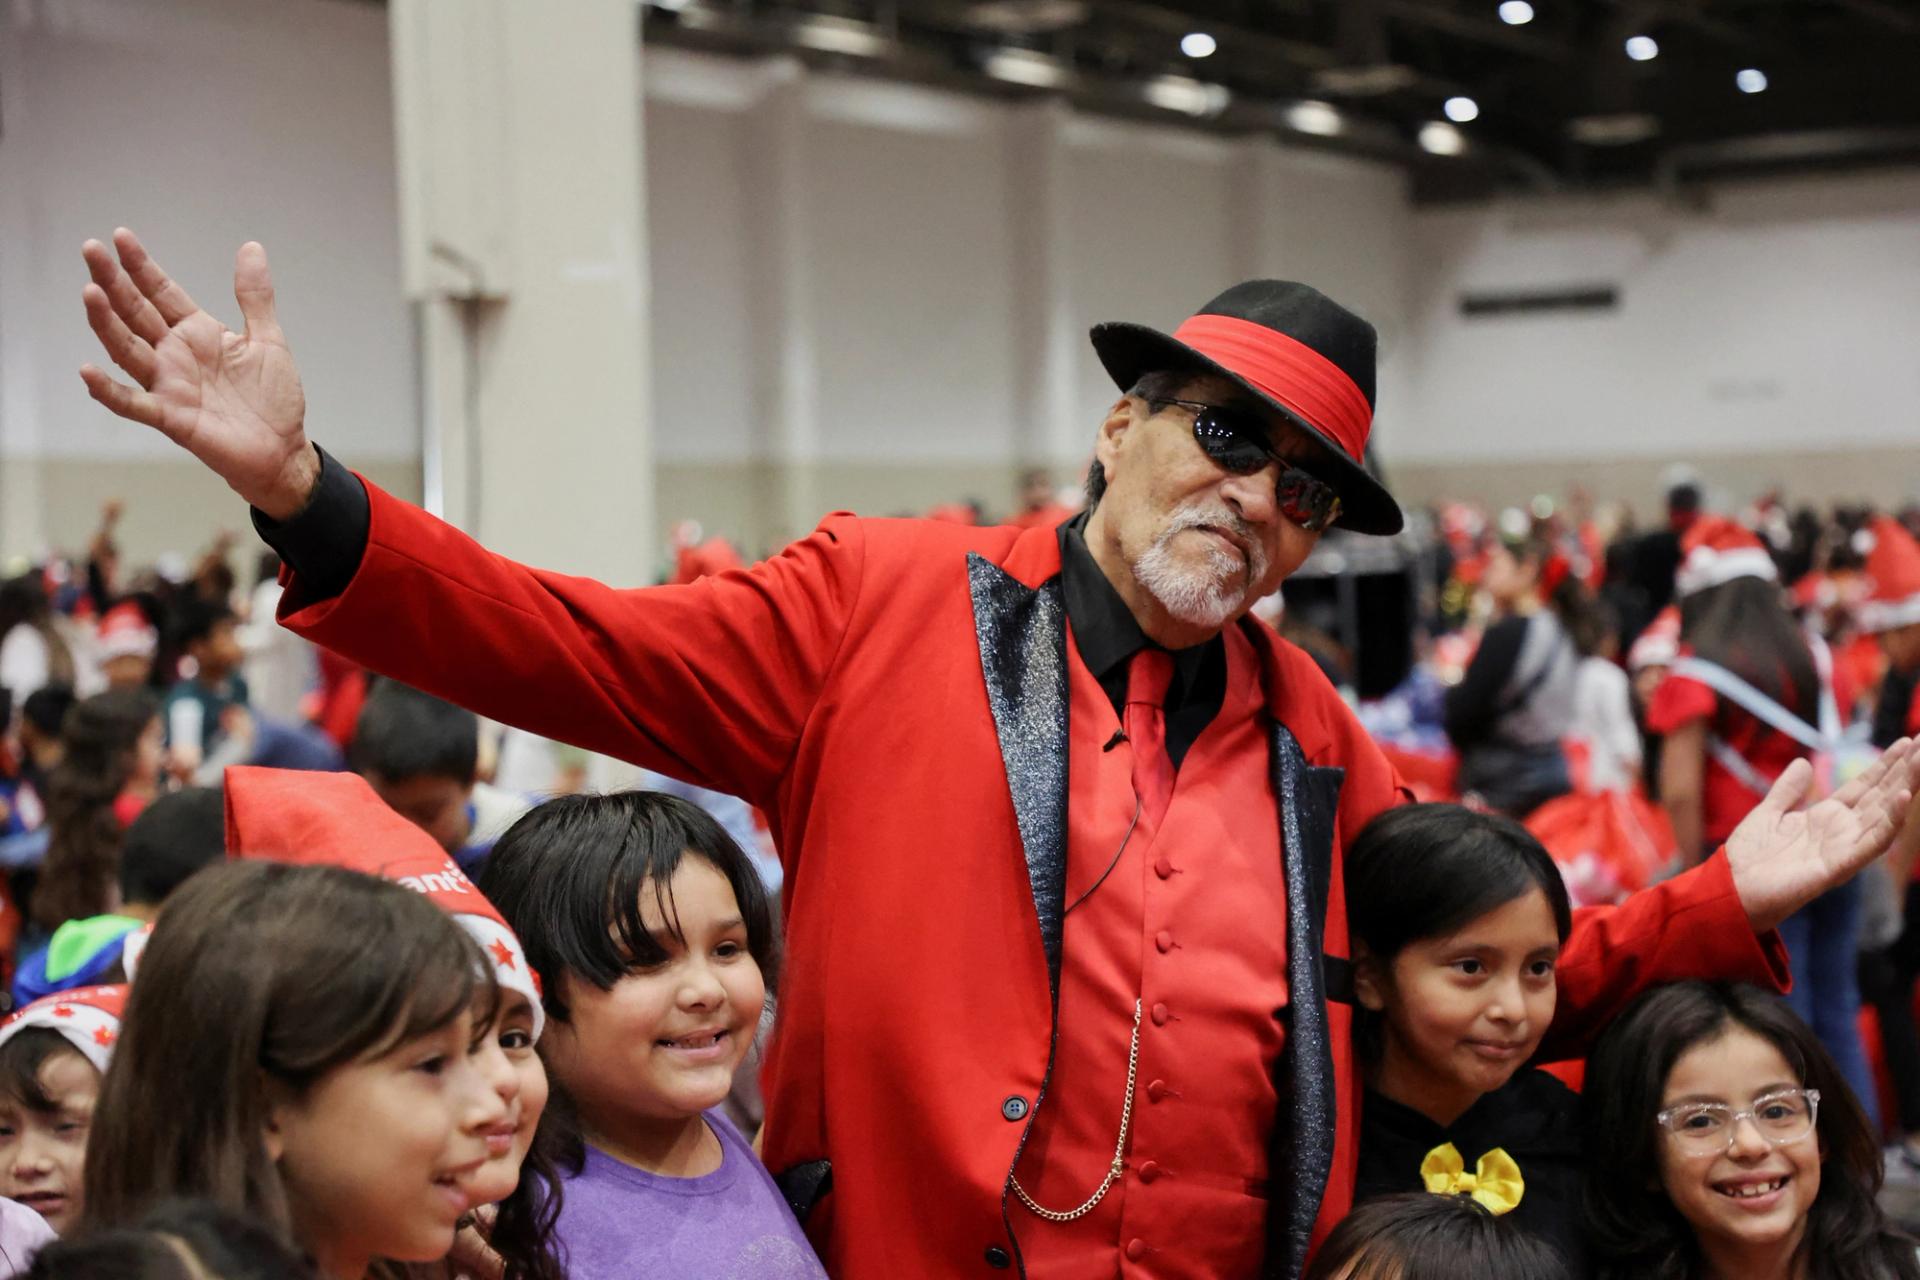 Richard Reyes, dressed as Pancho Claus, poses with children at the Navidad en el Barrio event in Houston, Texas, U.S., December 16, 2023.